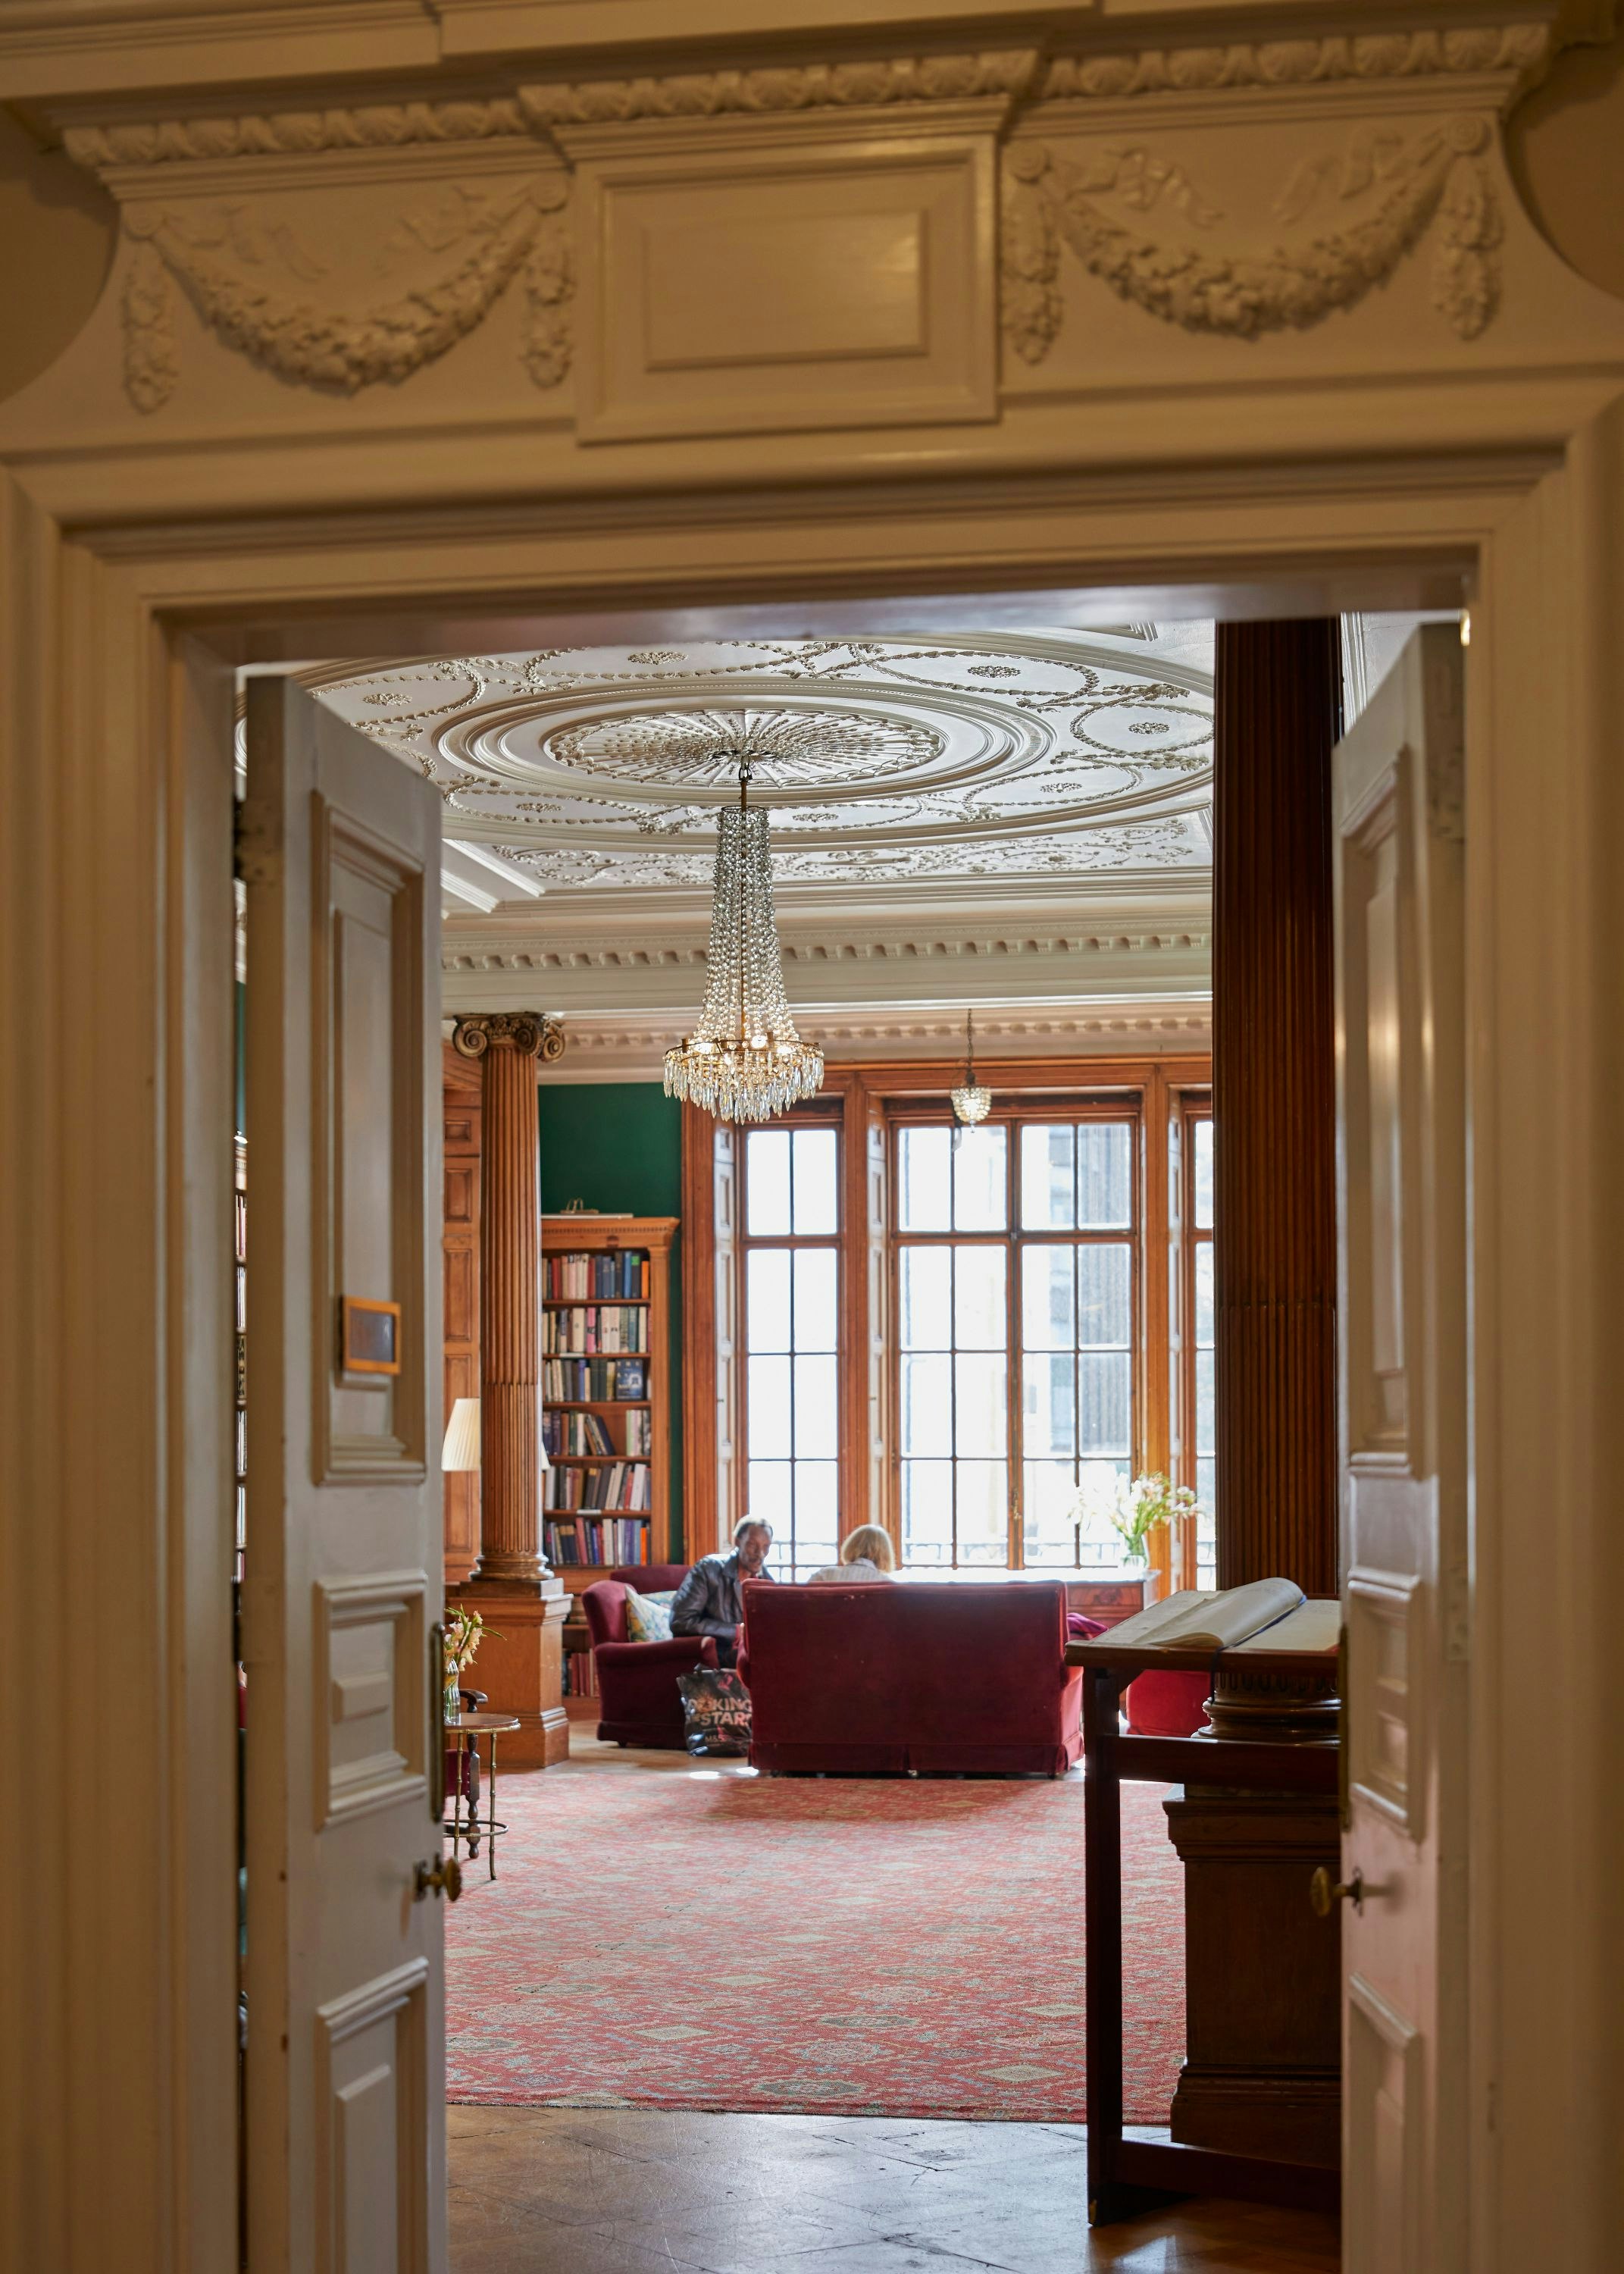 University Women's Club - The Library image 2